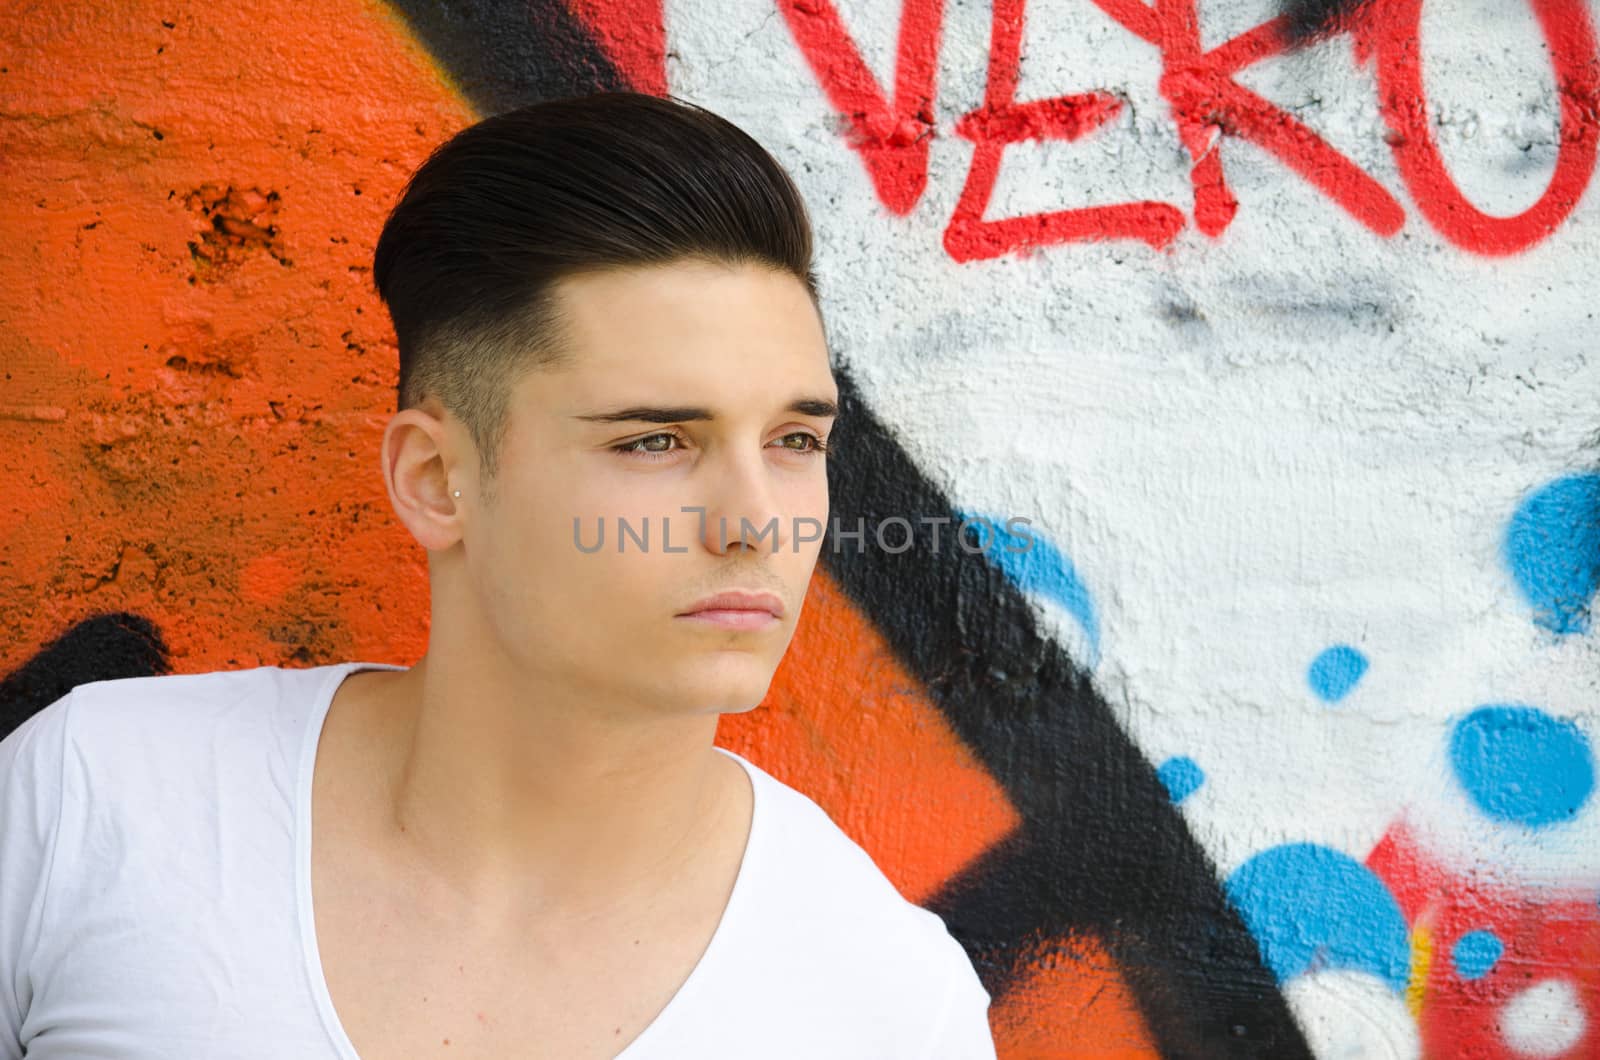 Good looking young man against graffiti wall by artofphoto